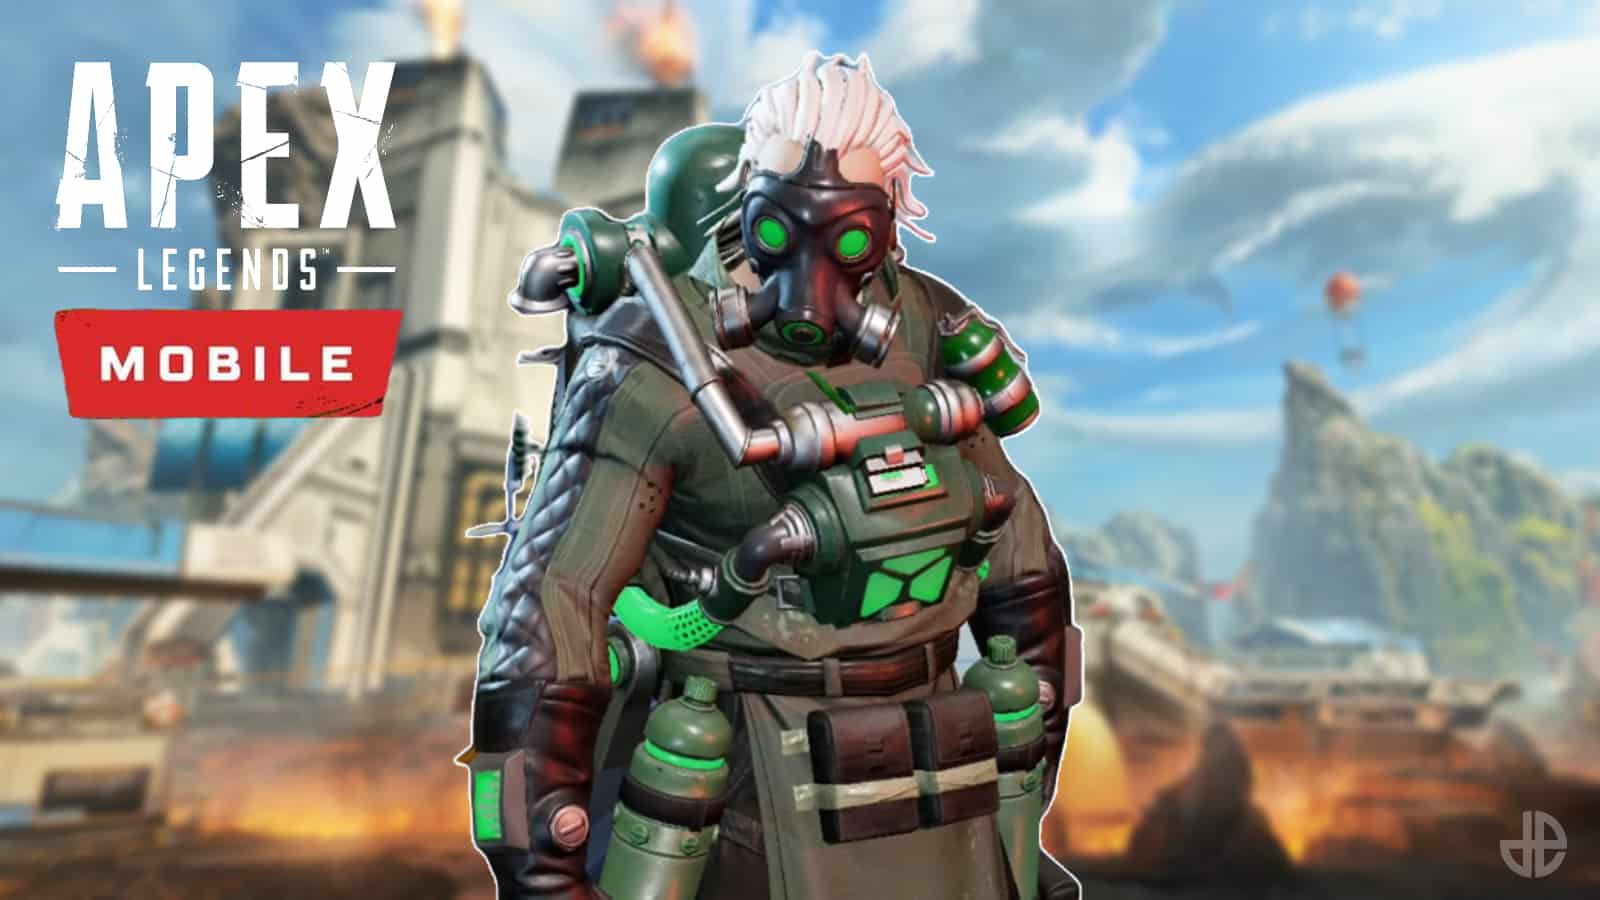 How to Unlock Every Legend in Apex Legends Mobile